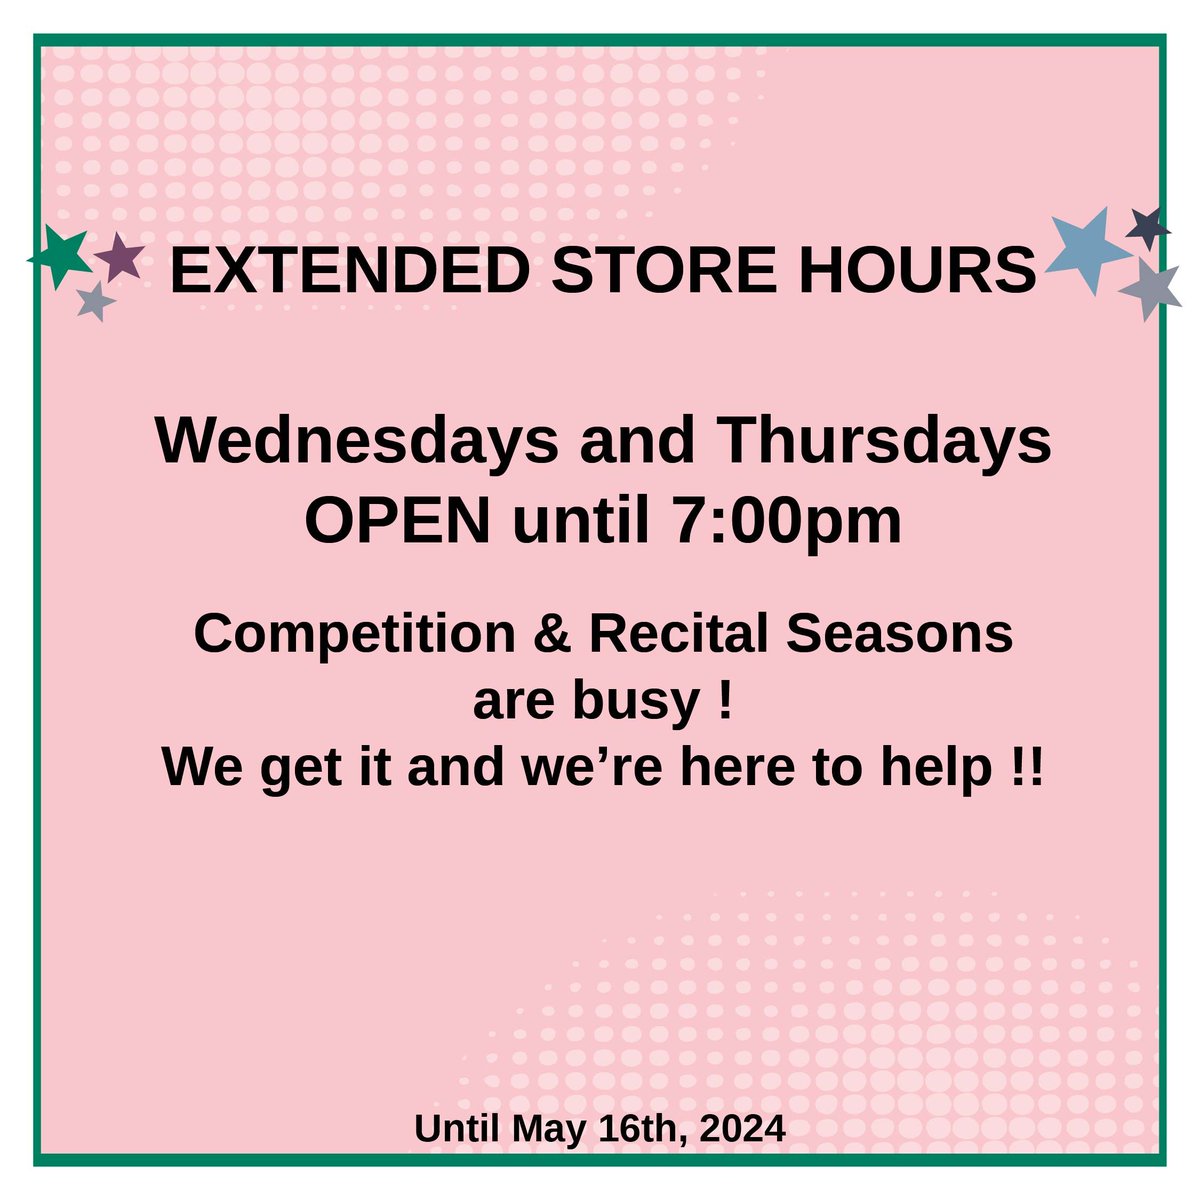 We're open until 7:00pm tonight (Wed) and tomorrow night (Thu) for your convenience during the busy competitive and recital seasons. The feedback from our customers has been very positive, so we will continue our extended our until May 16th, 2024. buff.ly/3fhw9k3